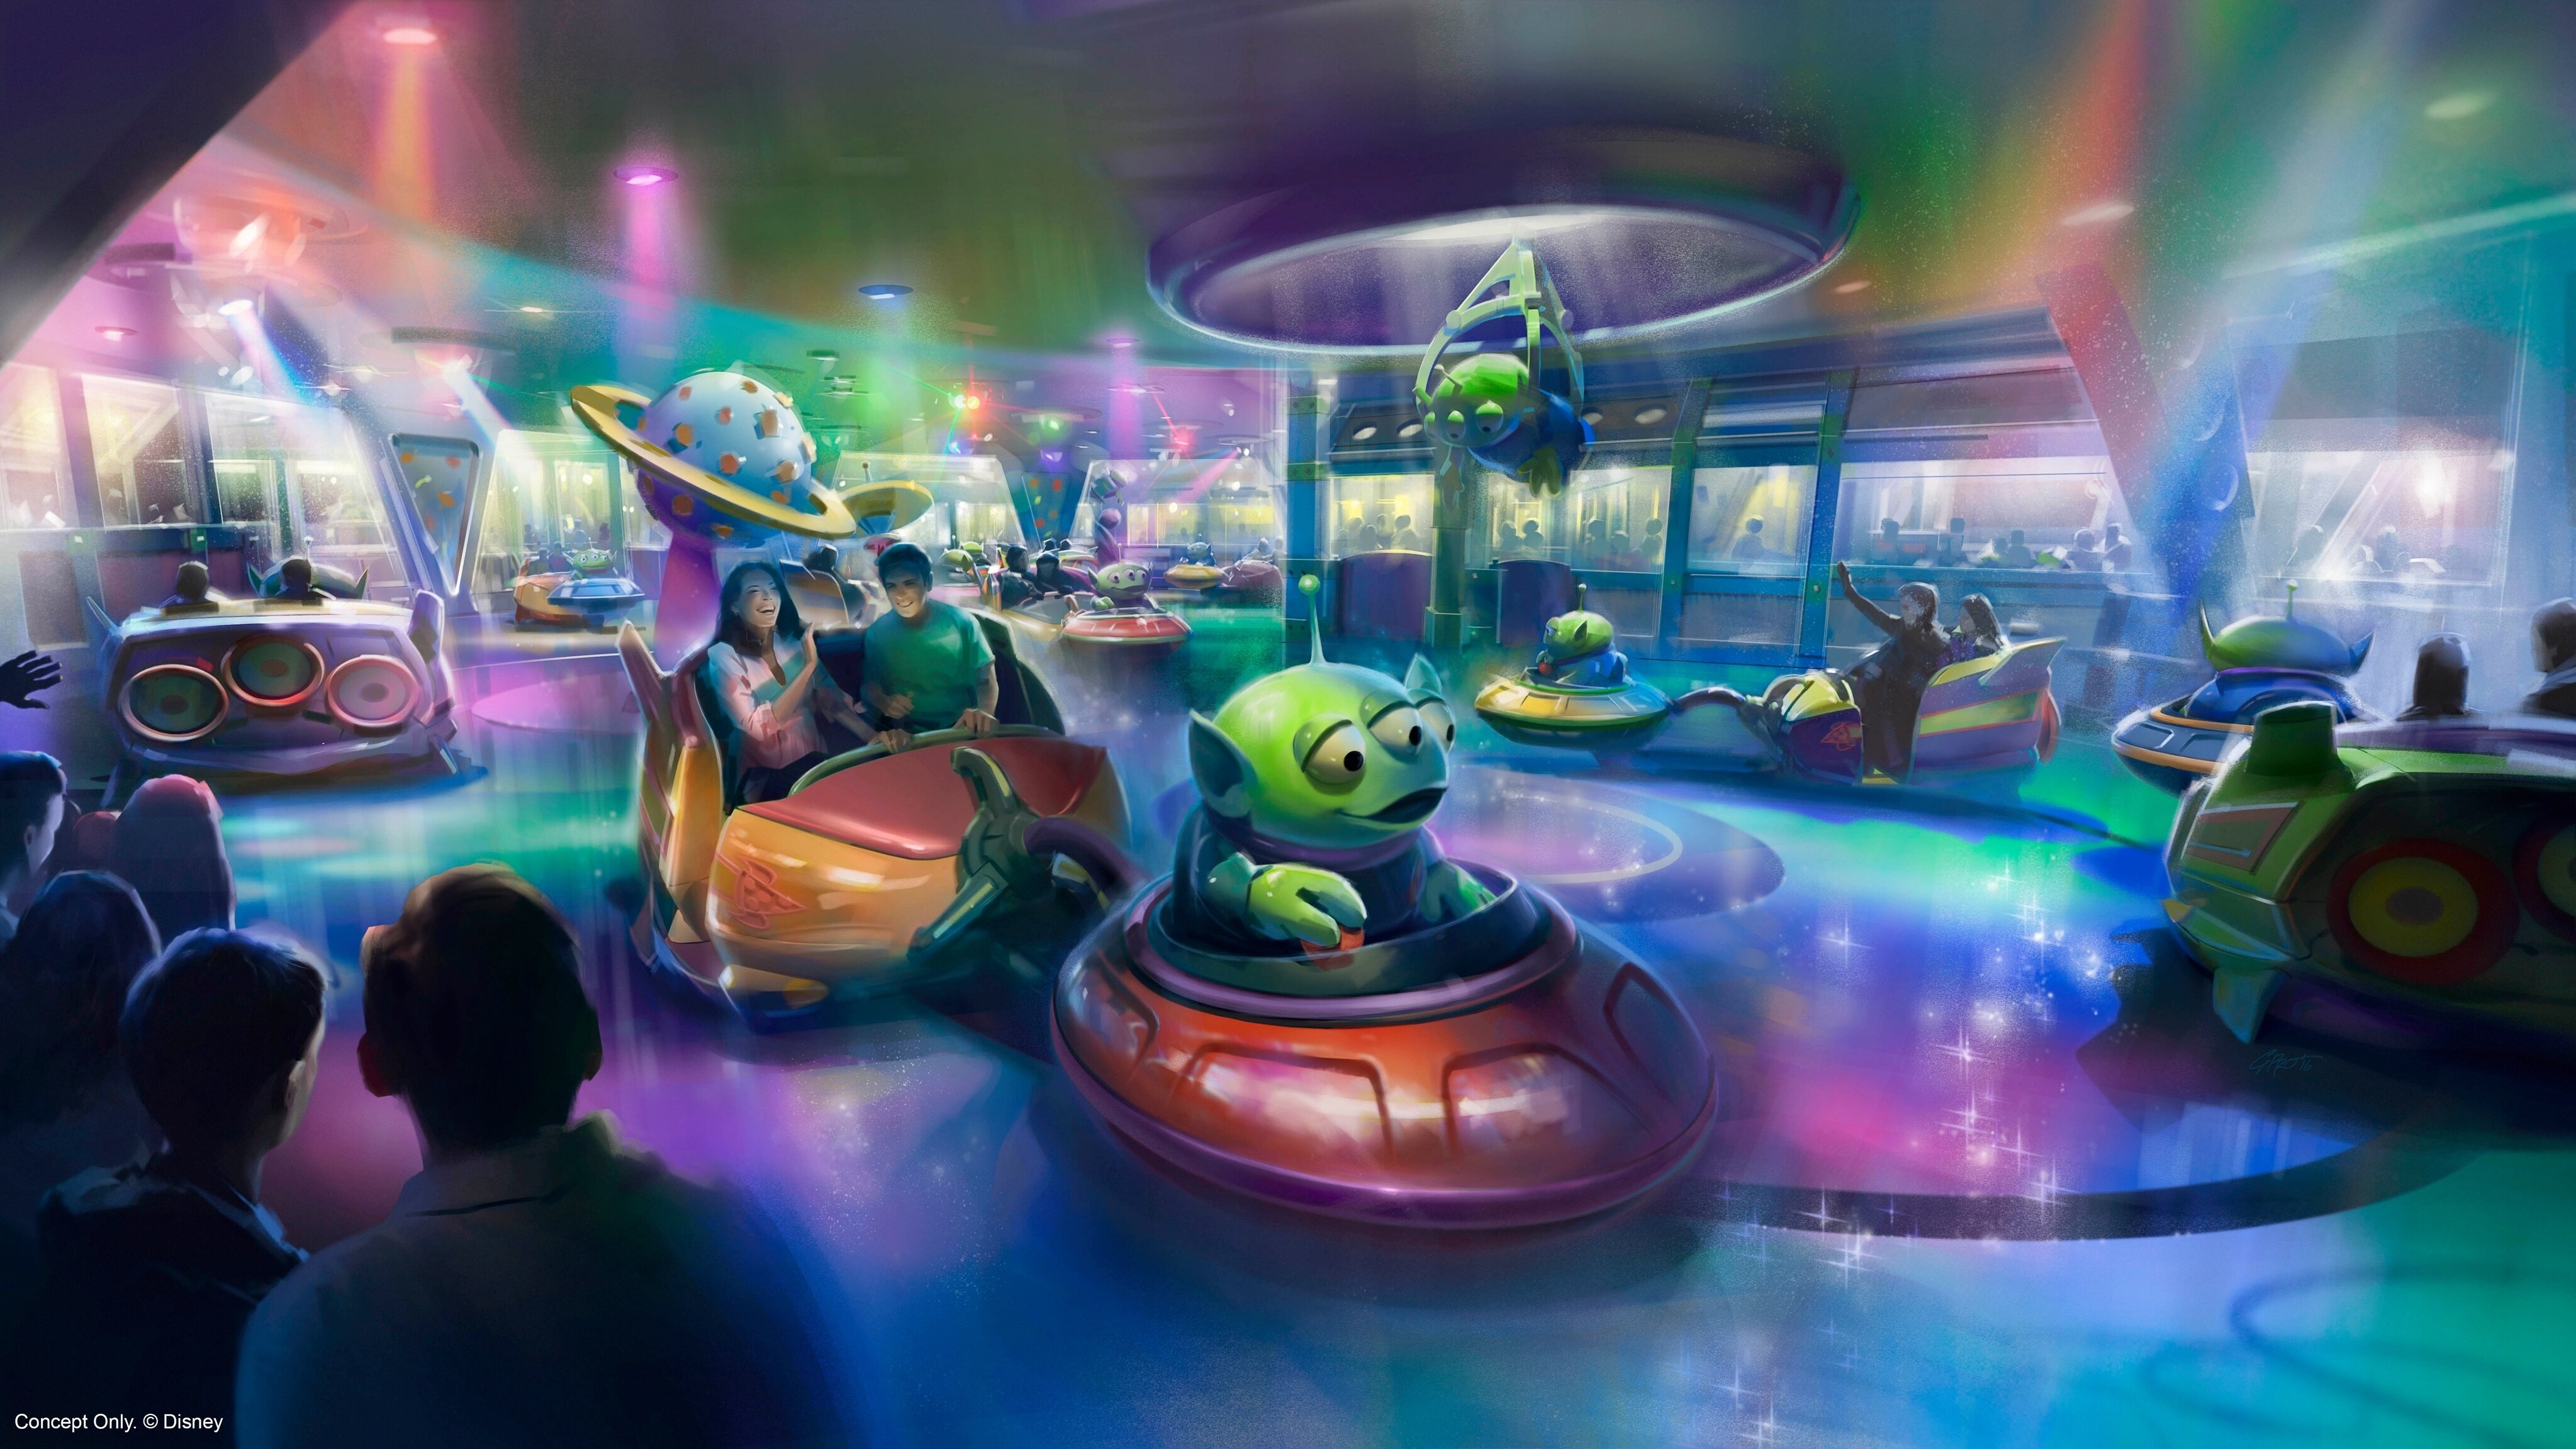 See a First Look at the Alien Swirling Saucers Coming to Toy Story Land at Walt Disney World